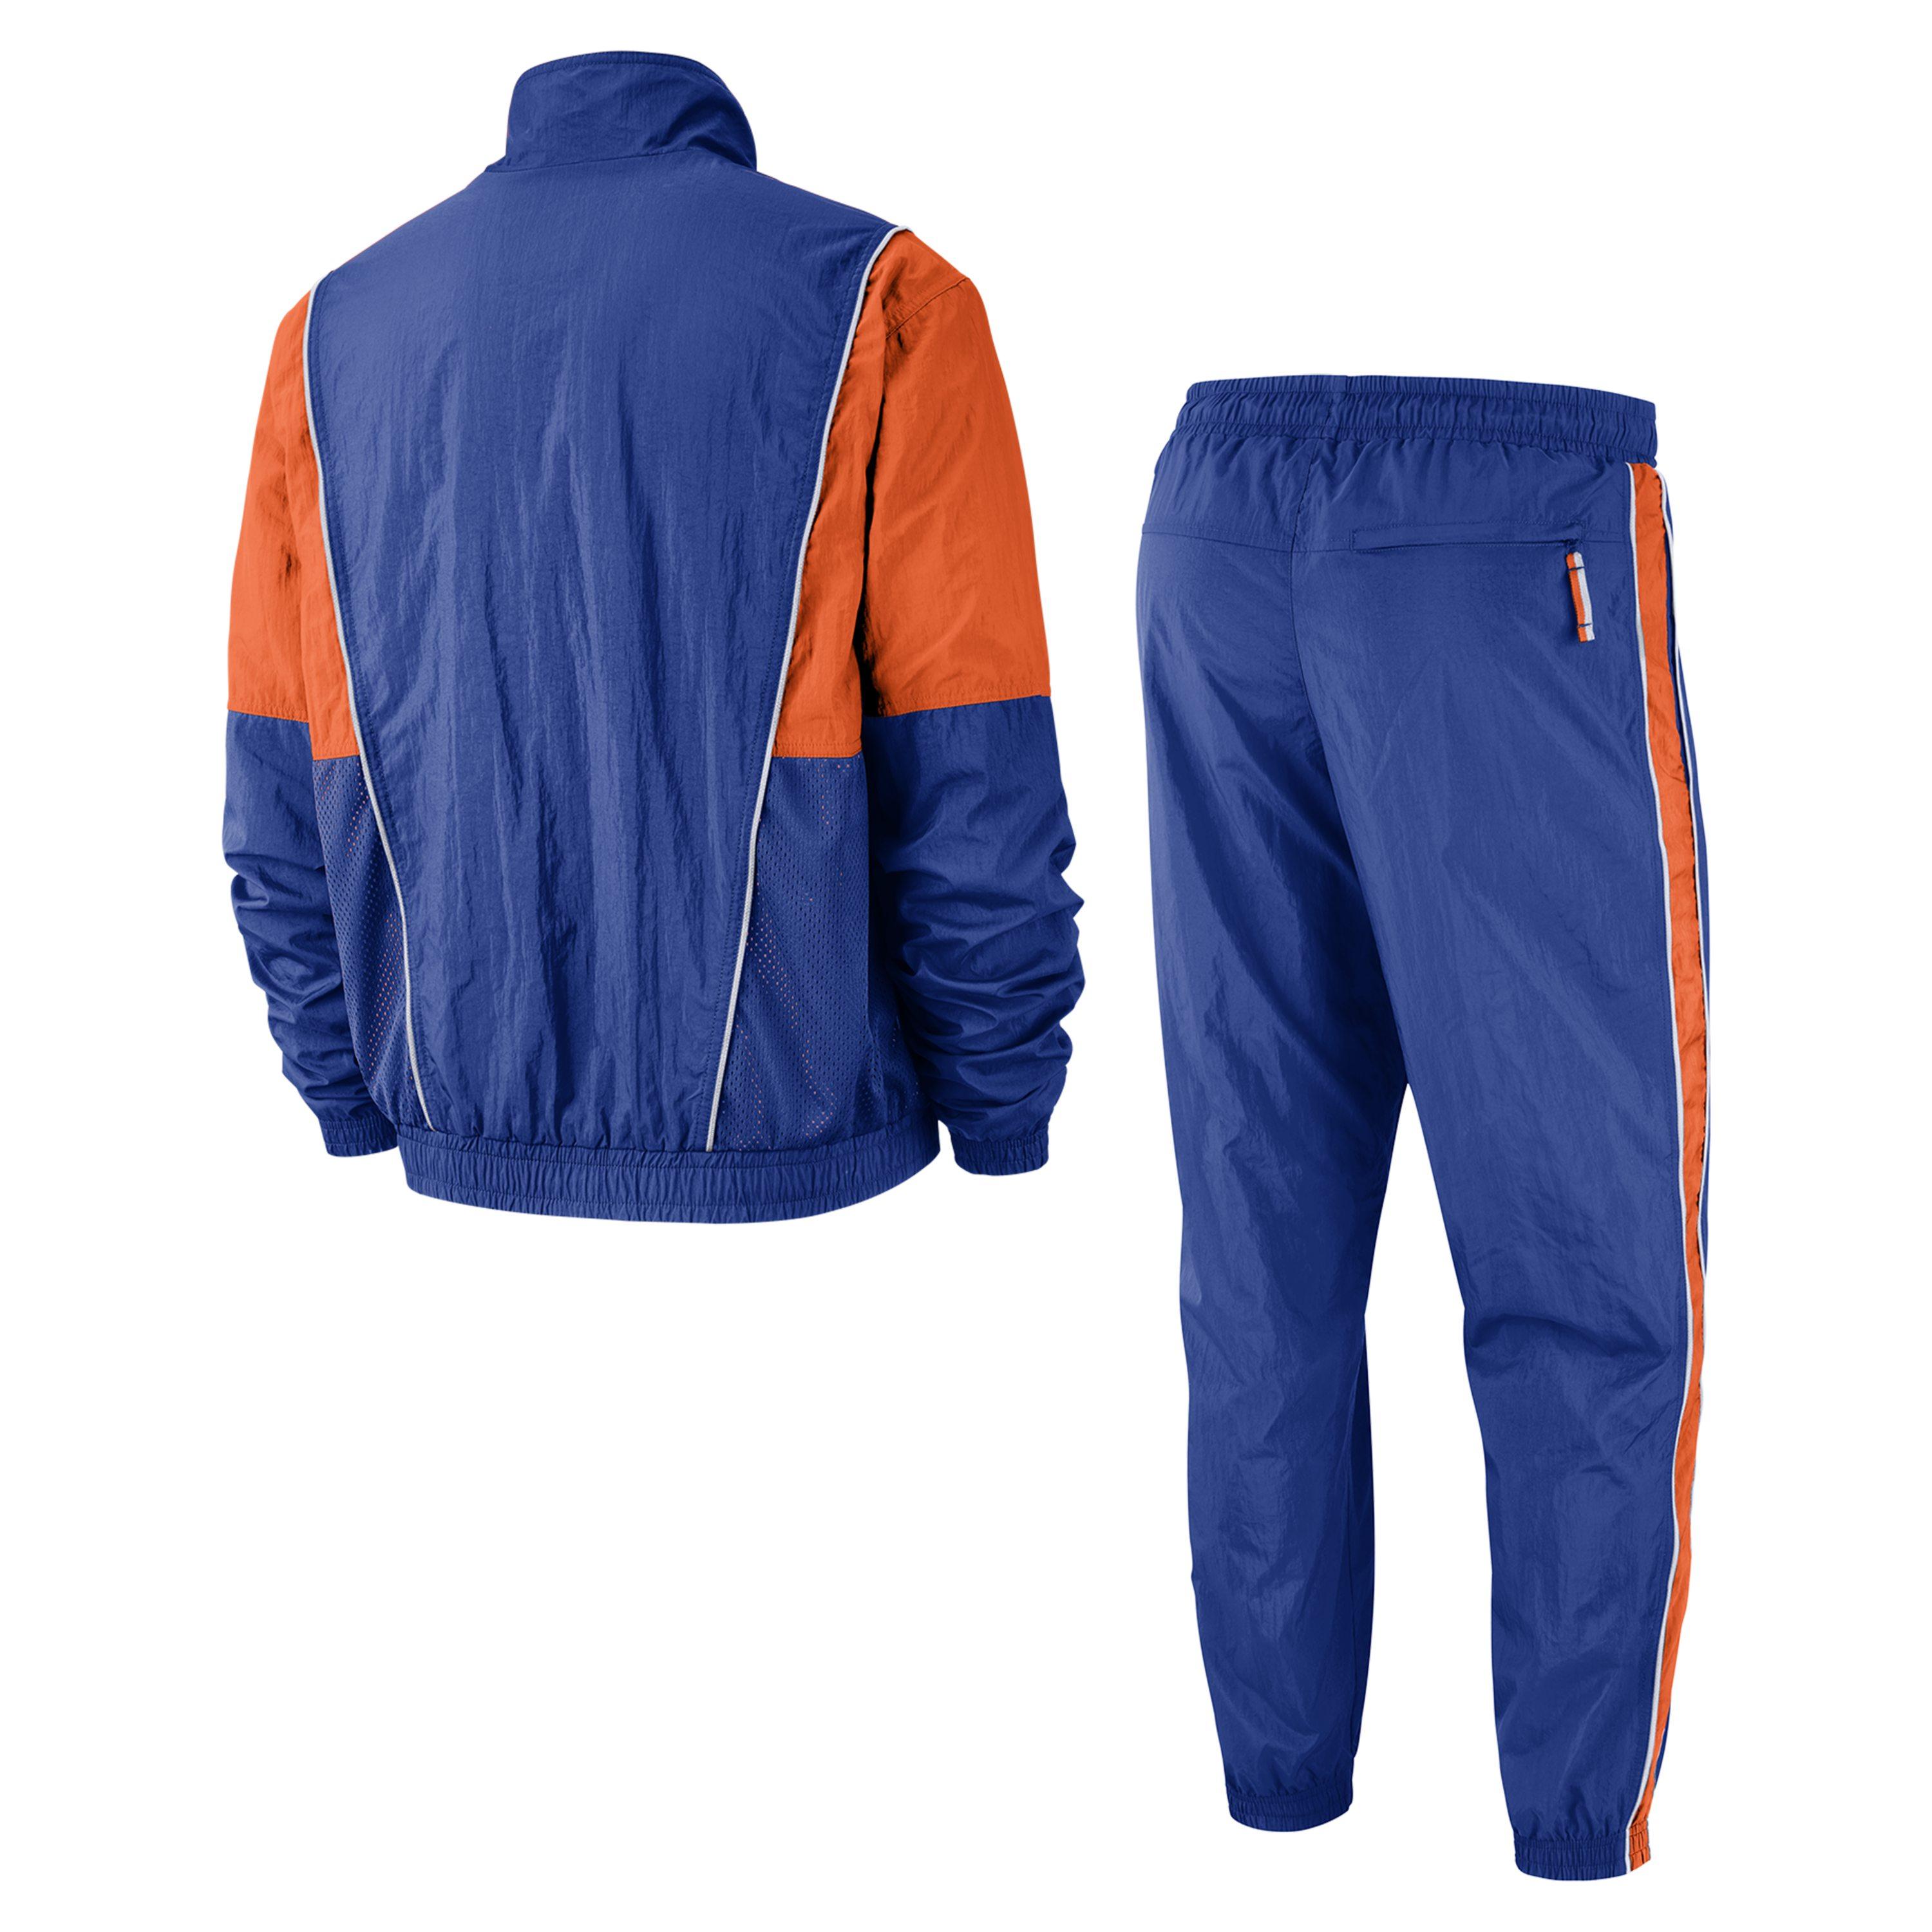 Nike Synthetic Cleveland Cavaliers Nba Tracksuit in Blue for Men - Lyst